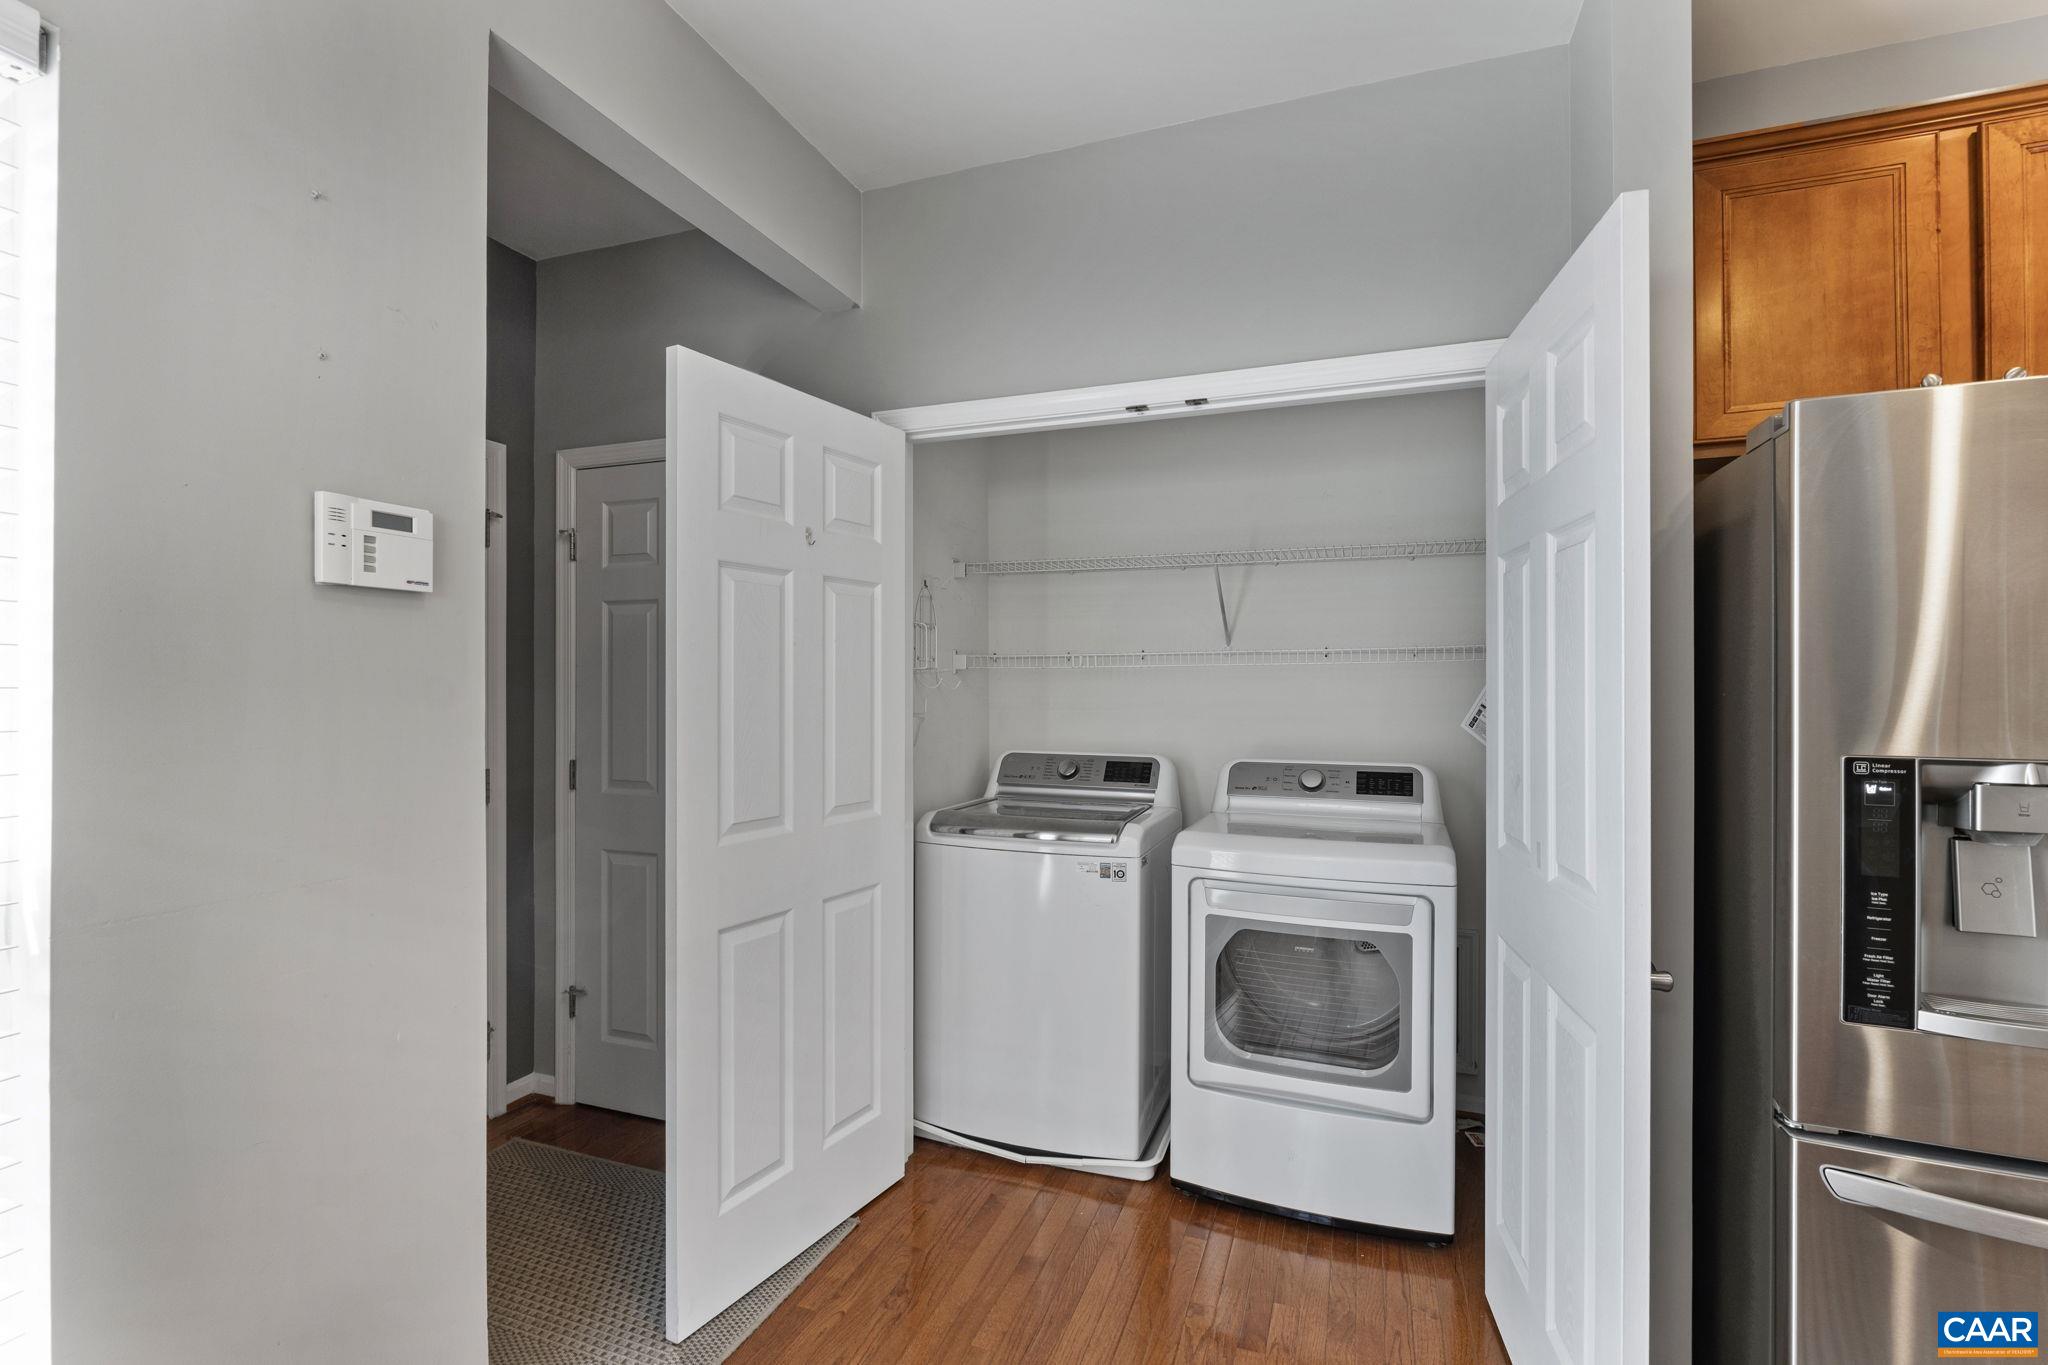 The washer & dryer come with the home